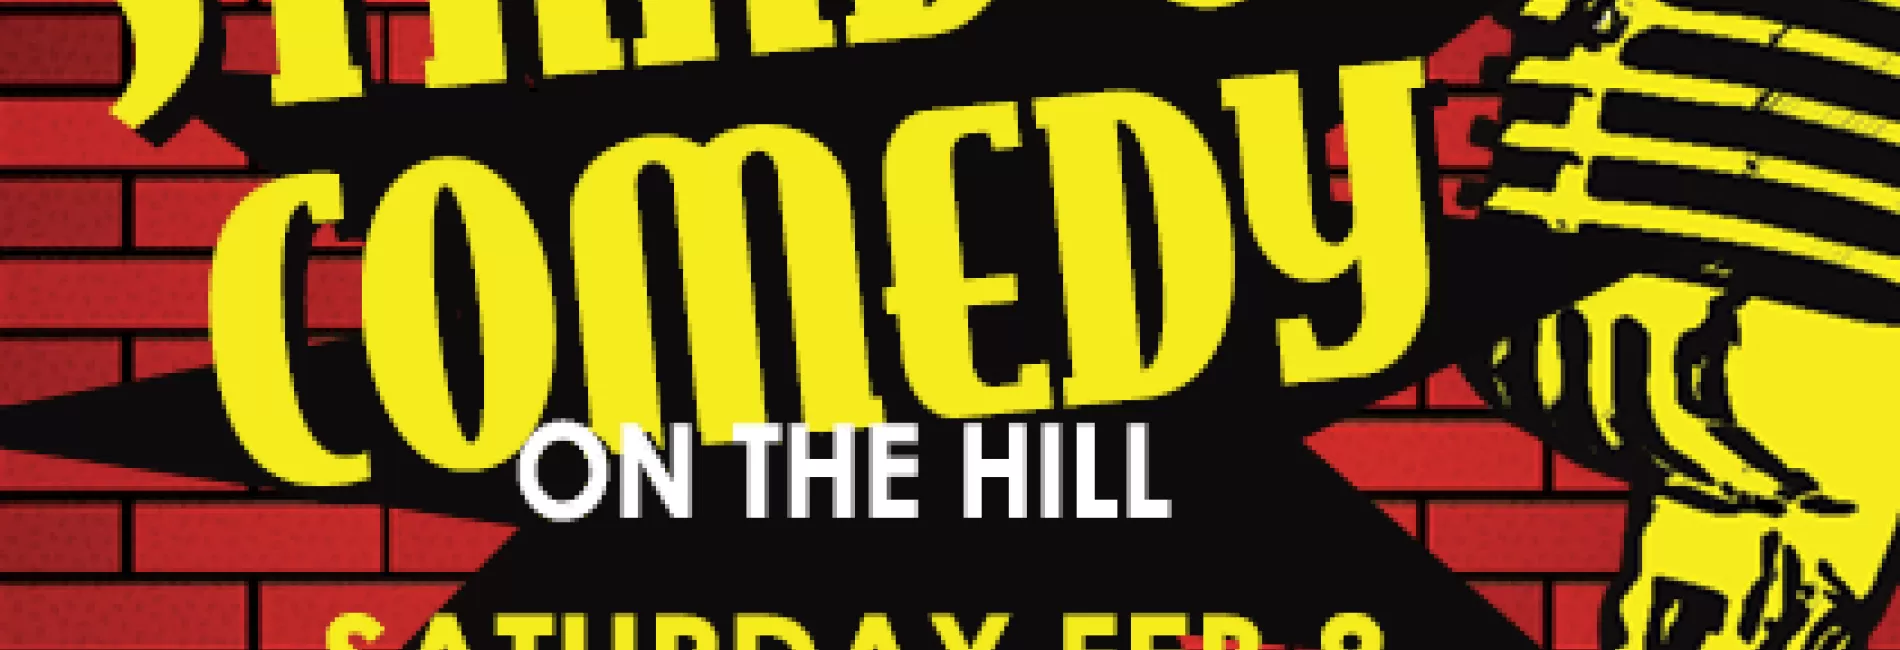 Stand-Up On the Hill February